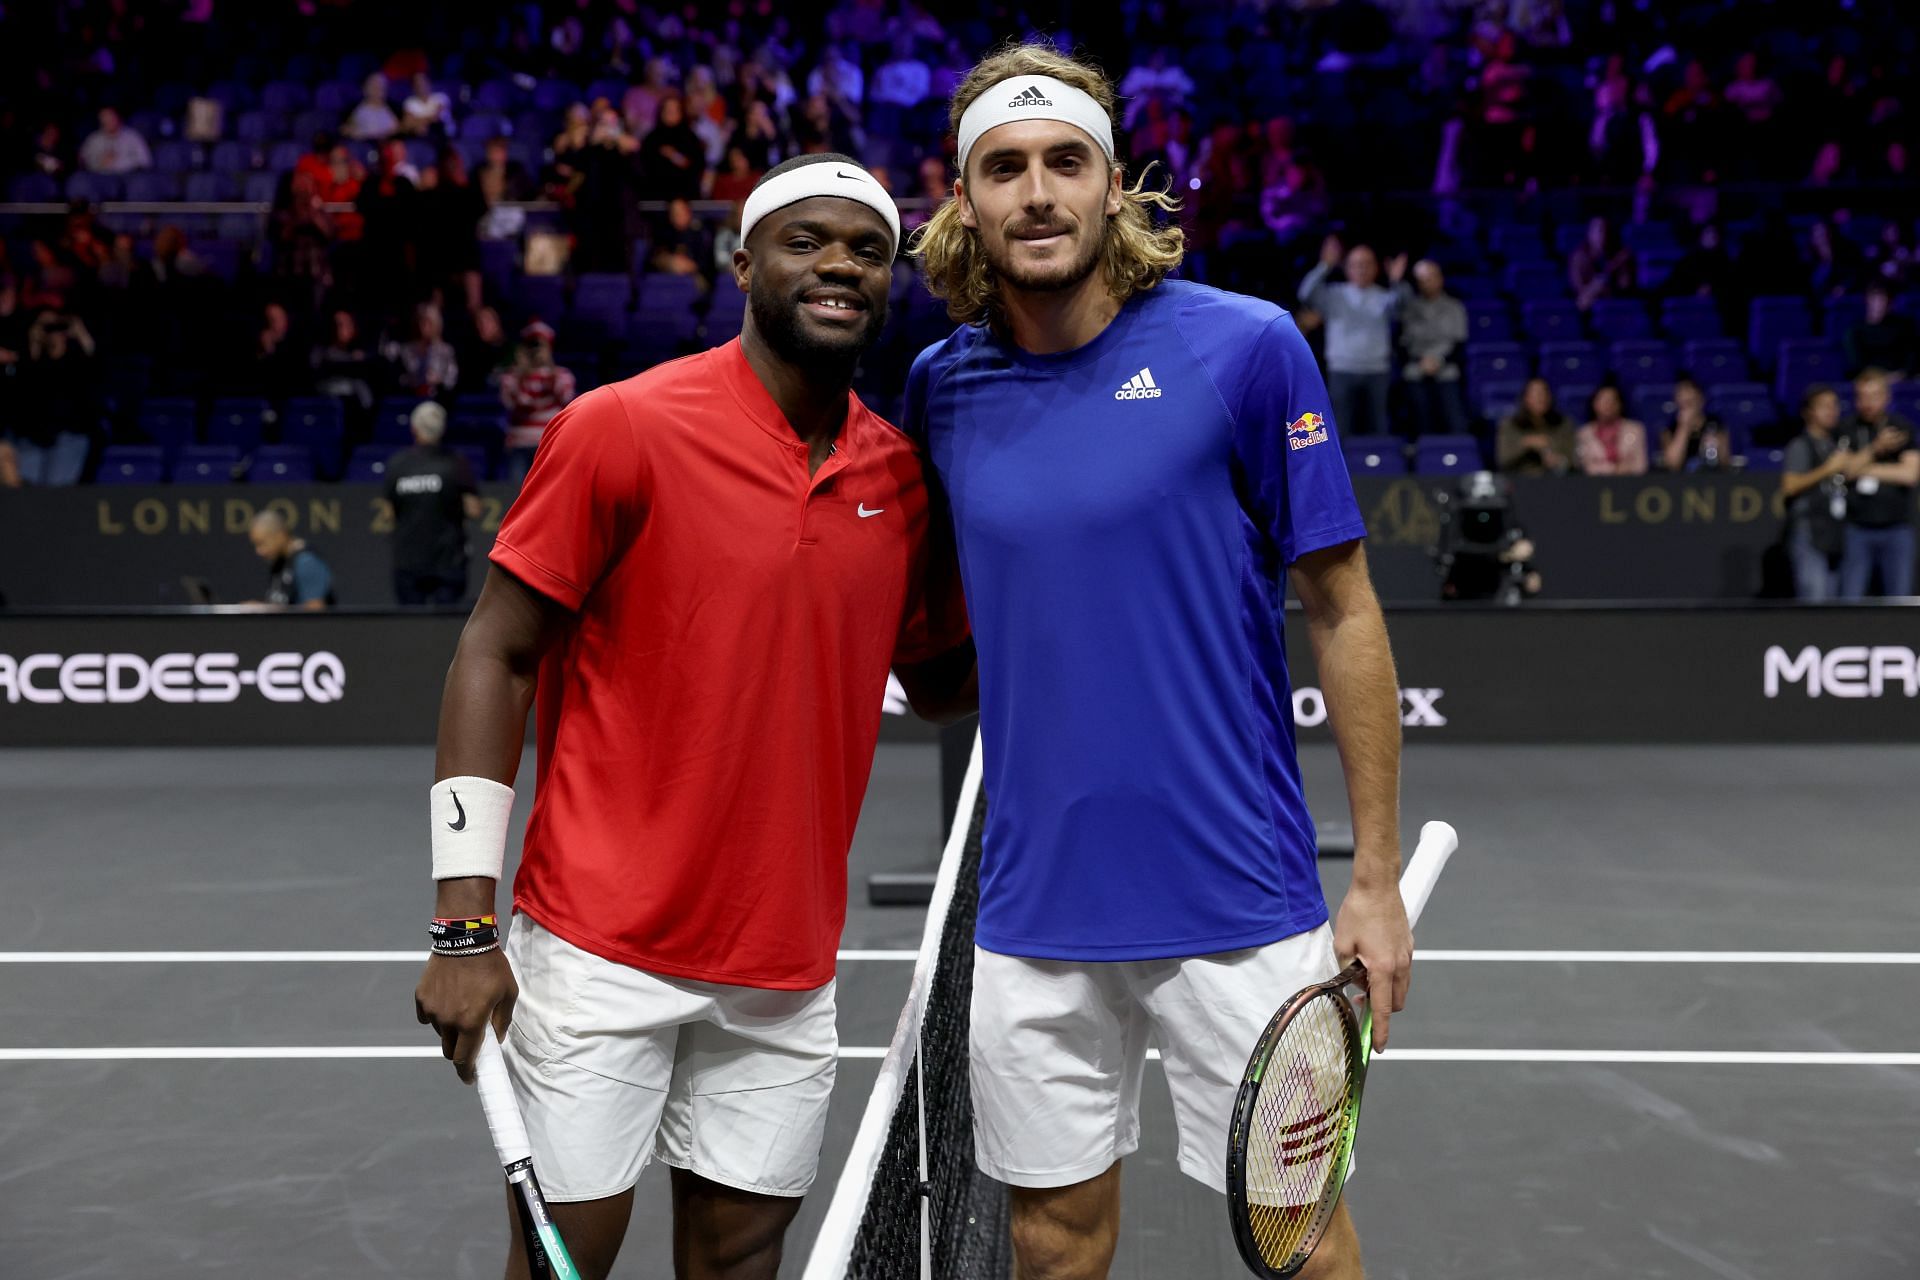 Frances Tiafoe (L) and Stefanos Tsitsipas (R) at the 2022 Laver Cup